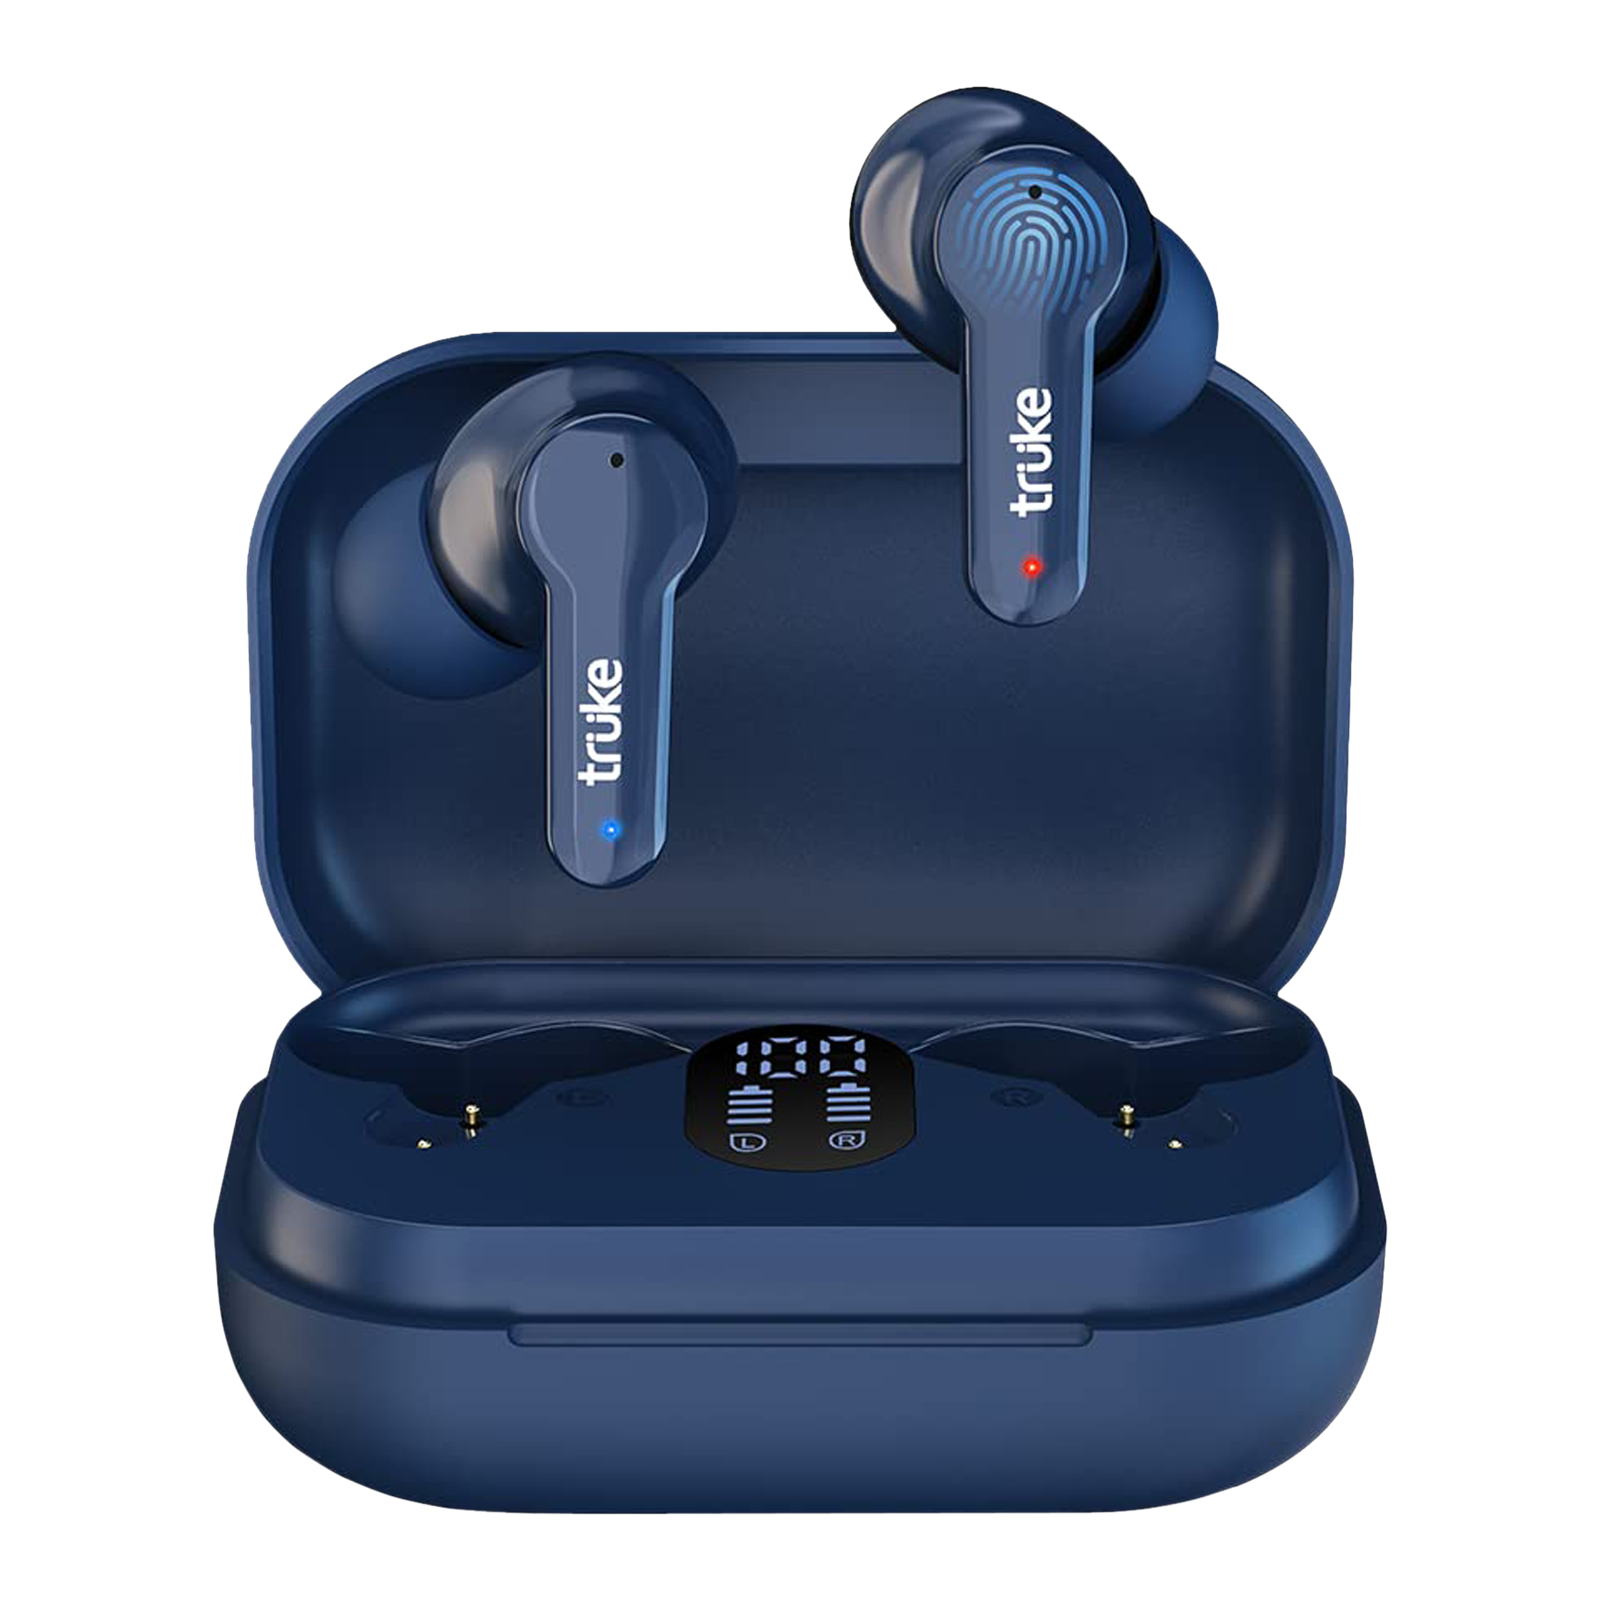 truke Buds Q1 E21 TWS Earbuds with Environmental Noise Cancellation (IPX4 Sweat & Water Resistant, 60 Hours Playback, Blue)